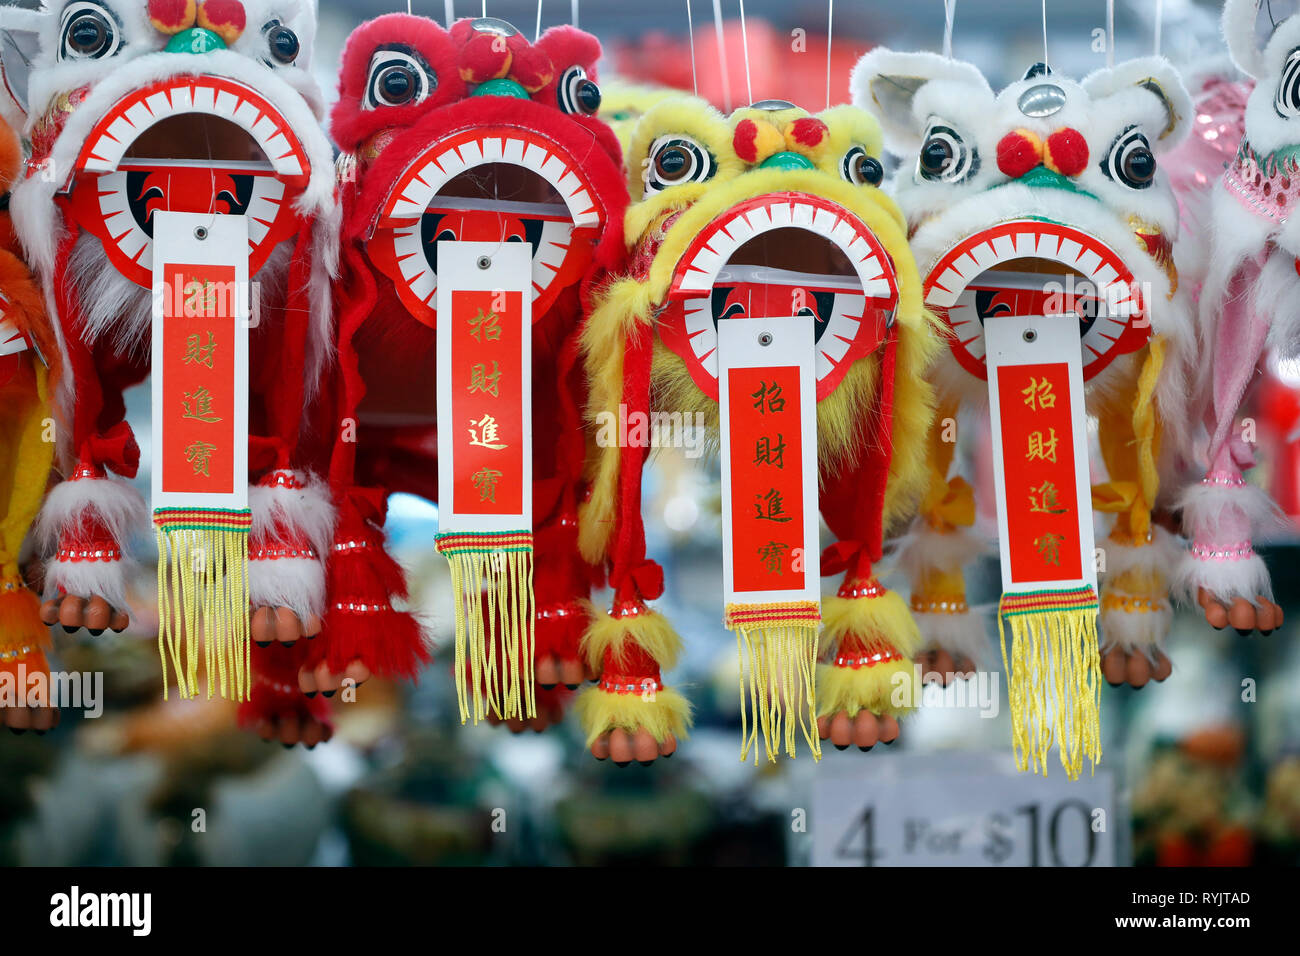 Dragons for chinese new year. Singapore. Stock Photo